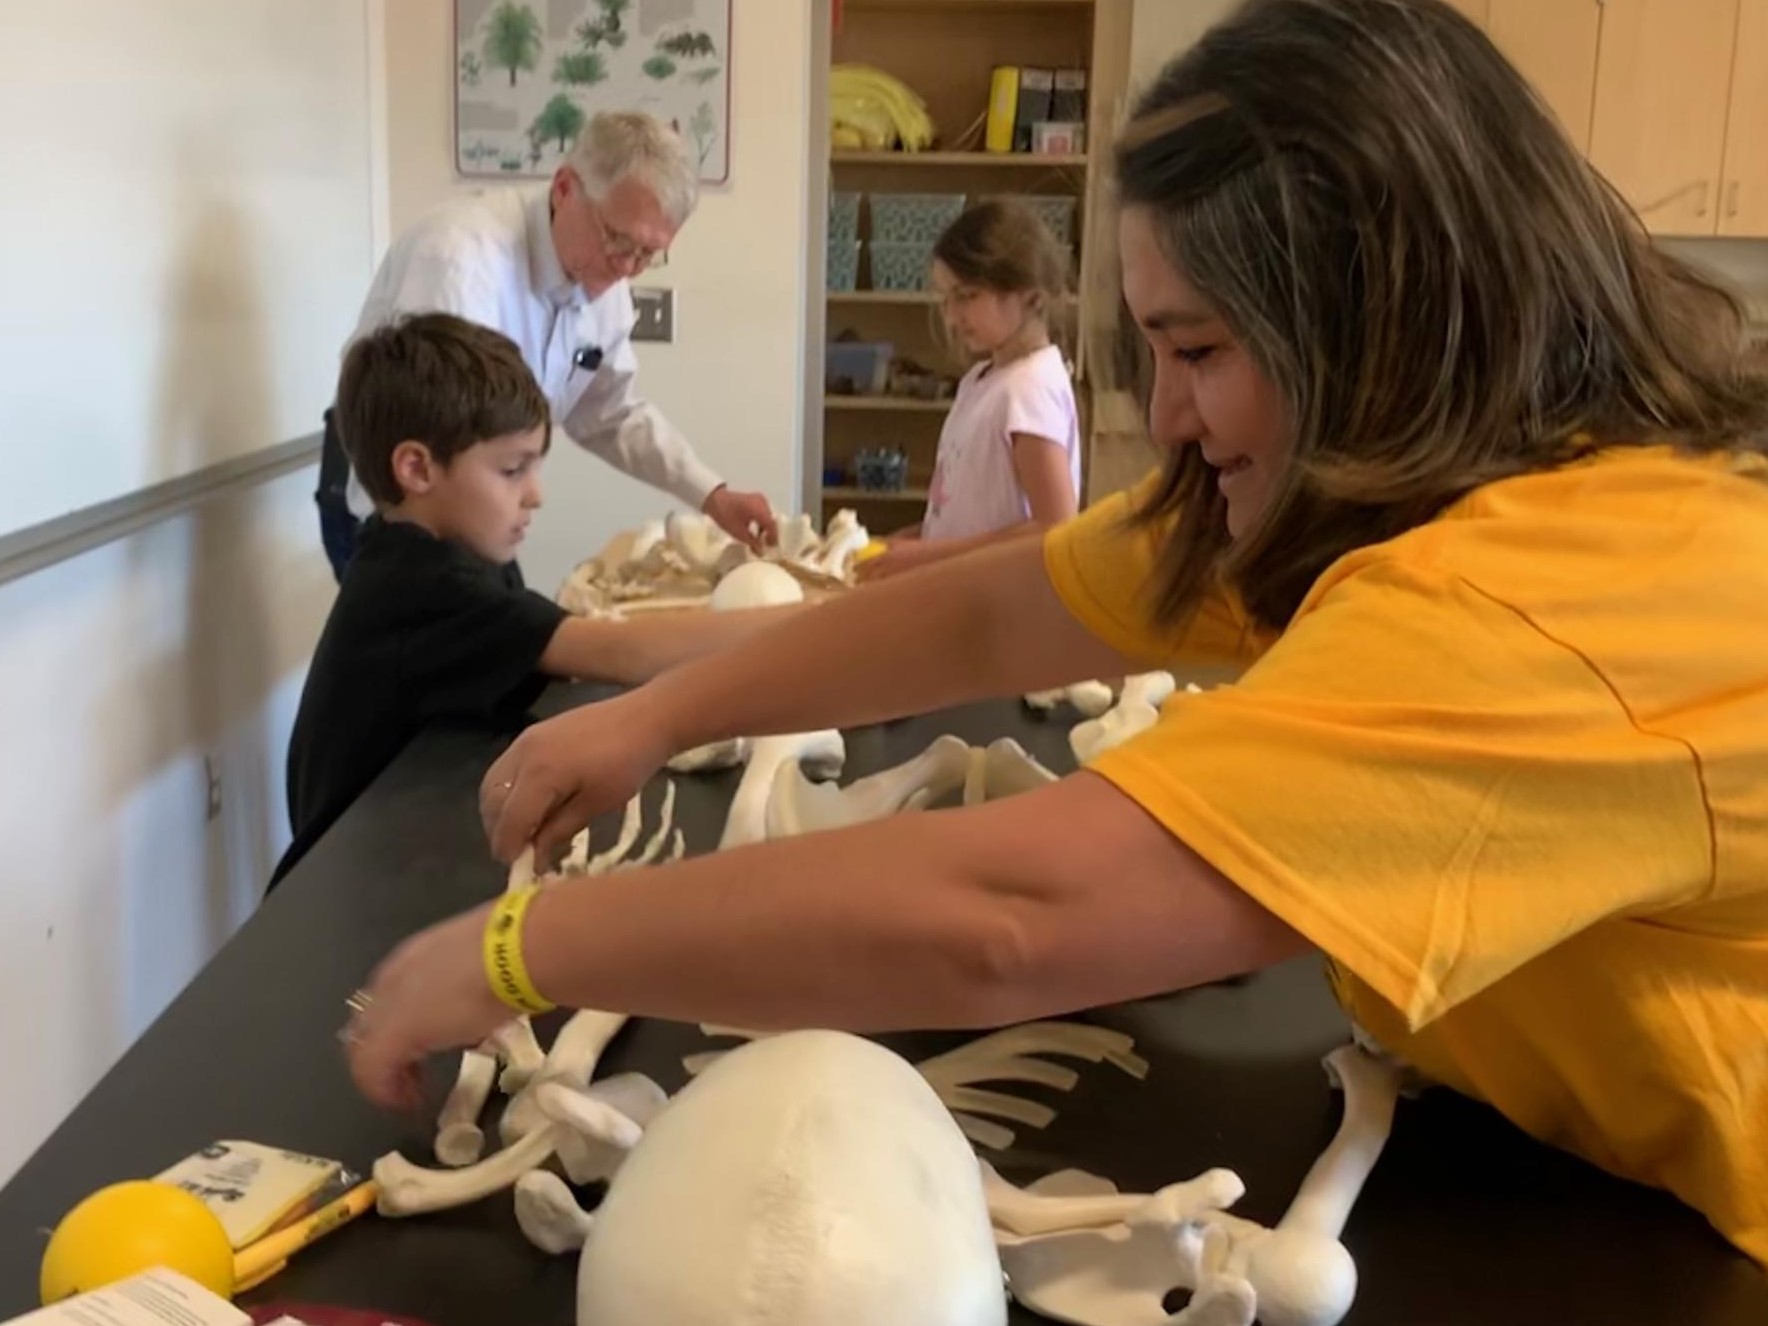 Emel Topal, her son and daughter race with College of Integrative Sciences and Arts dean Duane Roen to assemble lab skeletons at 2019 ASU Open Door event